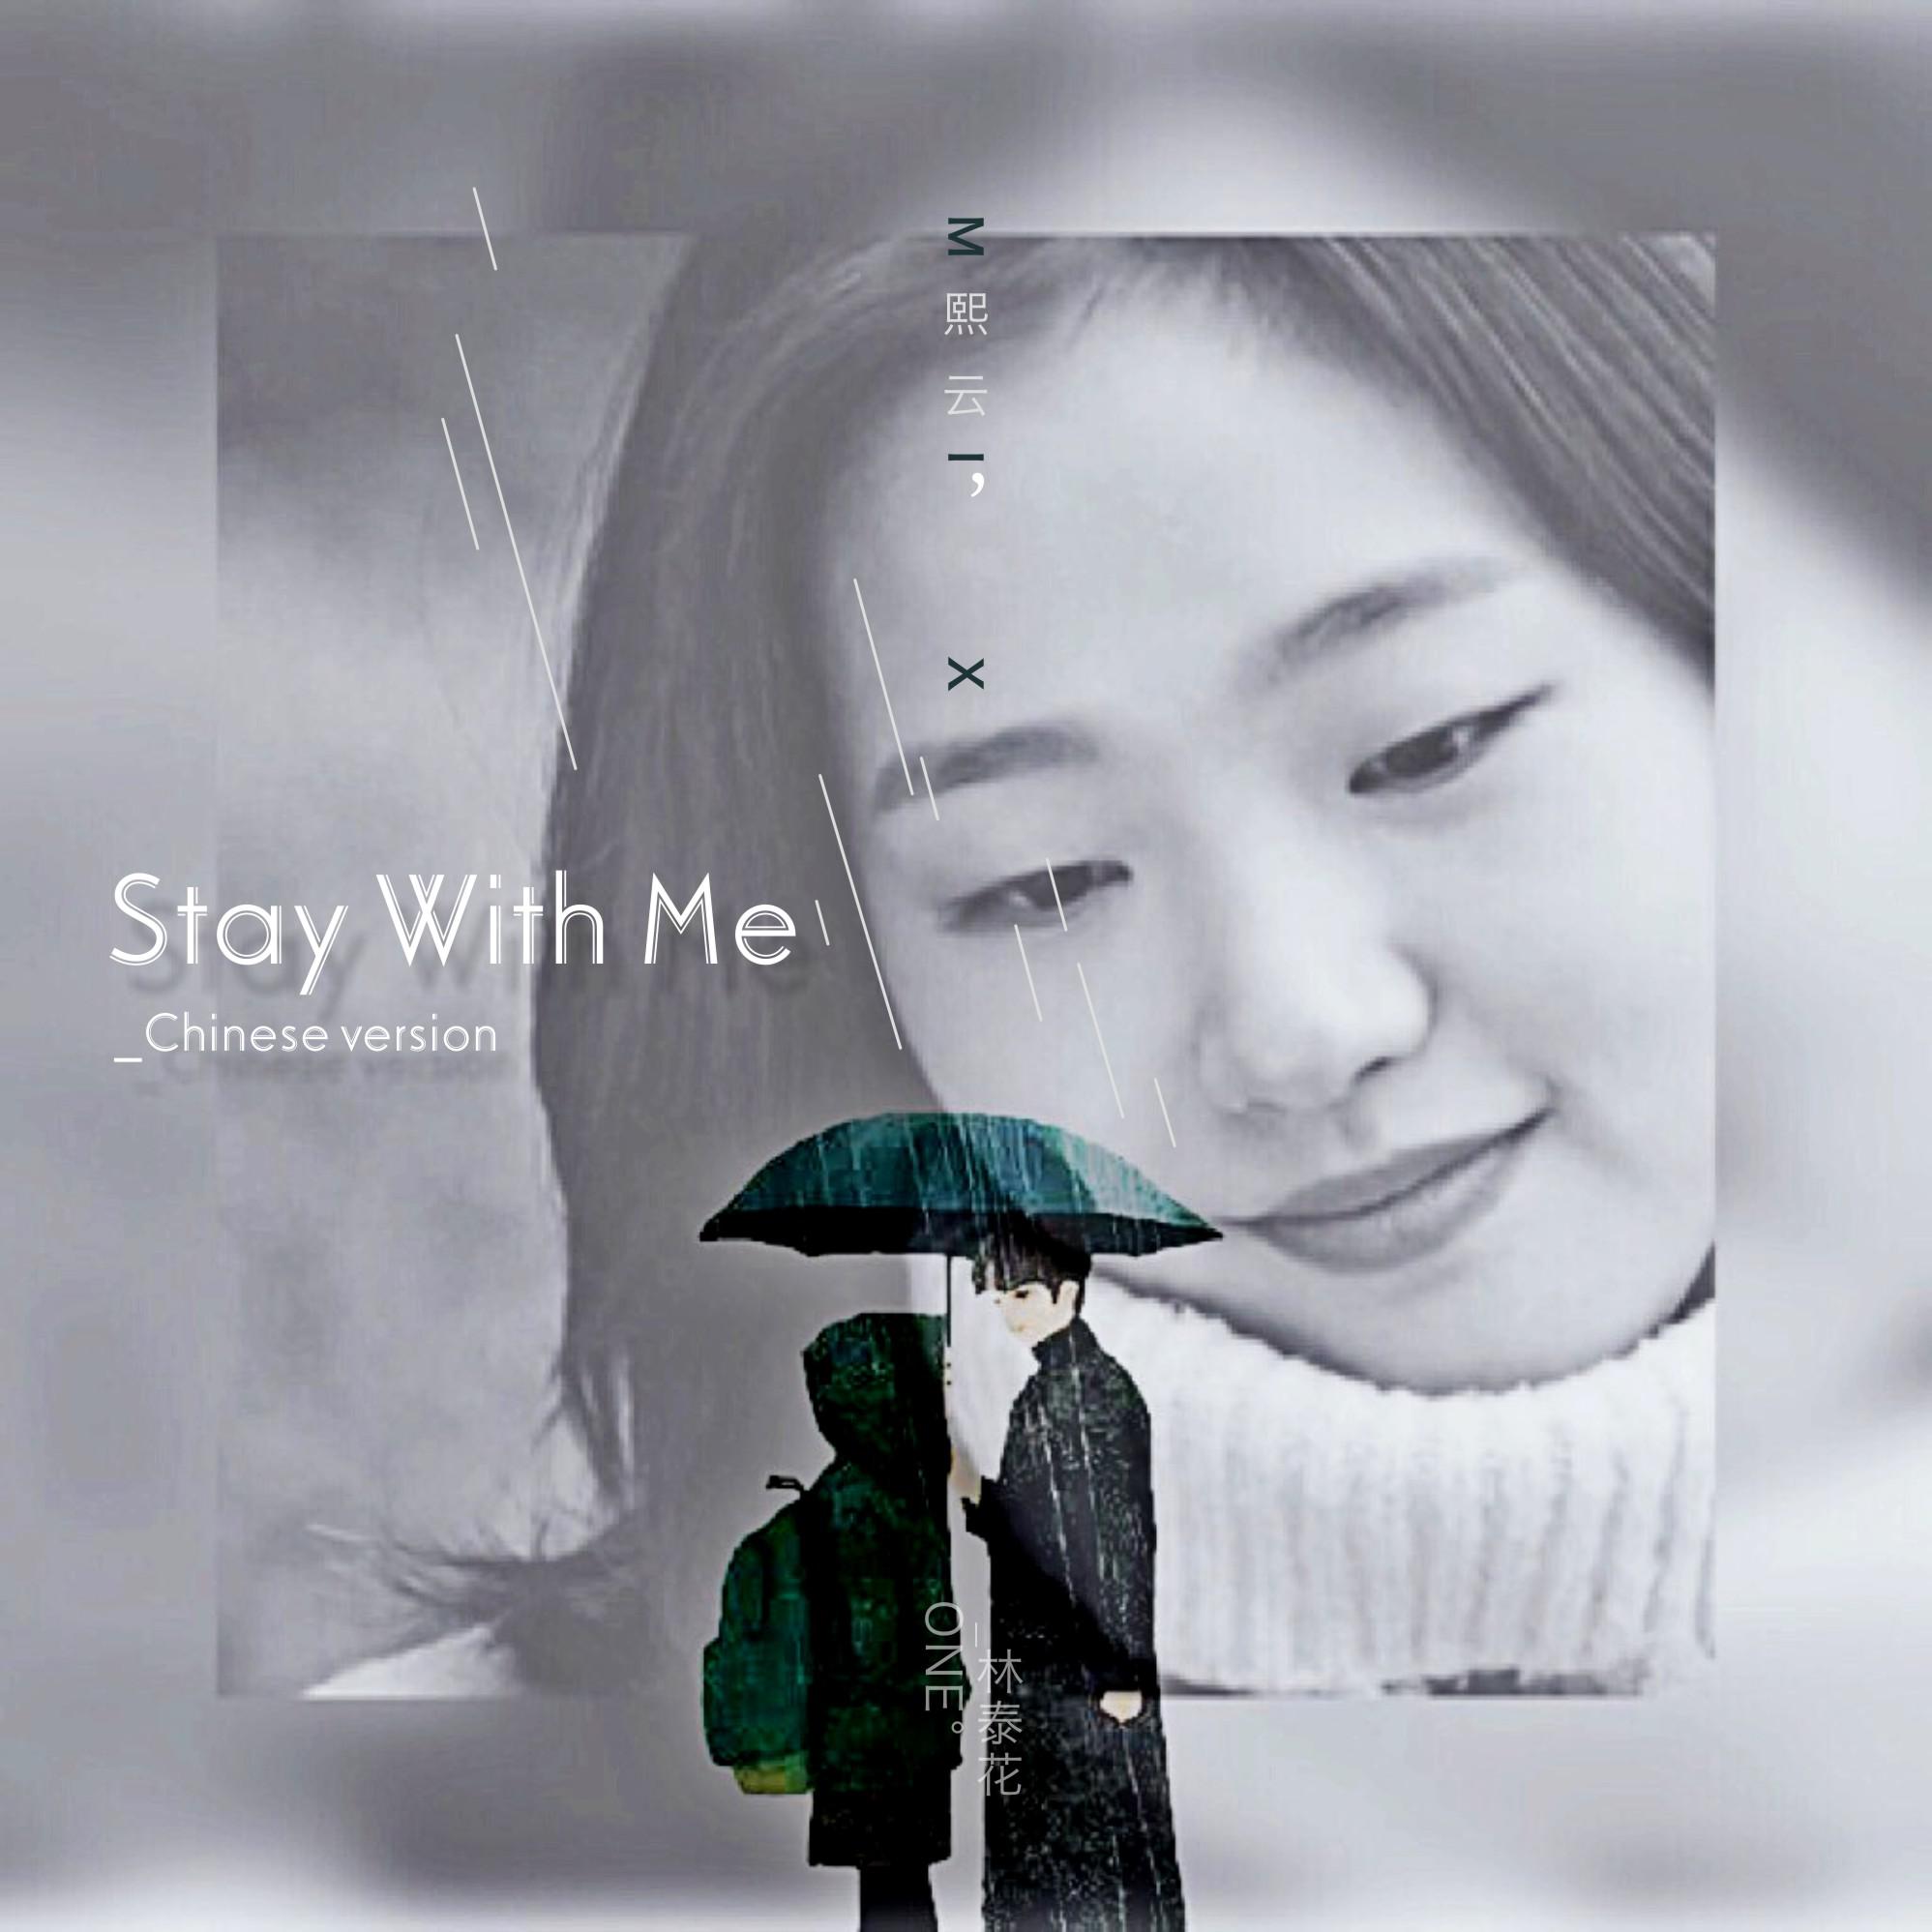 Stay With Me-填翻中文-鬼怪OST（Cover 朴灿烈、PUNCH）歌词 歌手ONE / 林泰花-专辑鬼怪OST-填翻中文-Beautiful、Stay with me-单曲《Stay With Me-填翻中文-鬼怪OST（Cover 朴灿烈、PUNCH）》LRC歌词下载